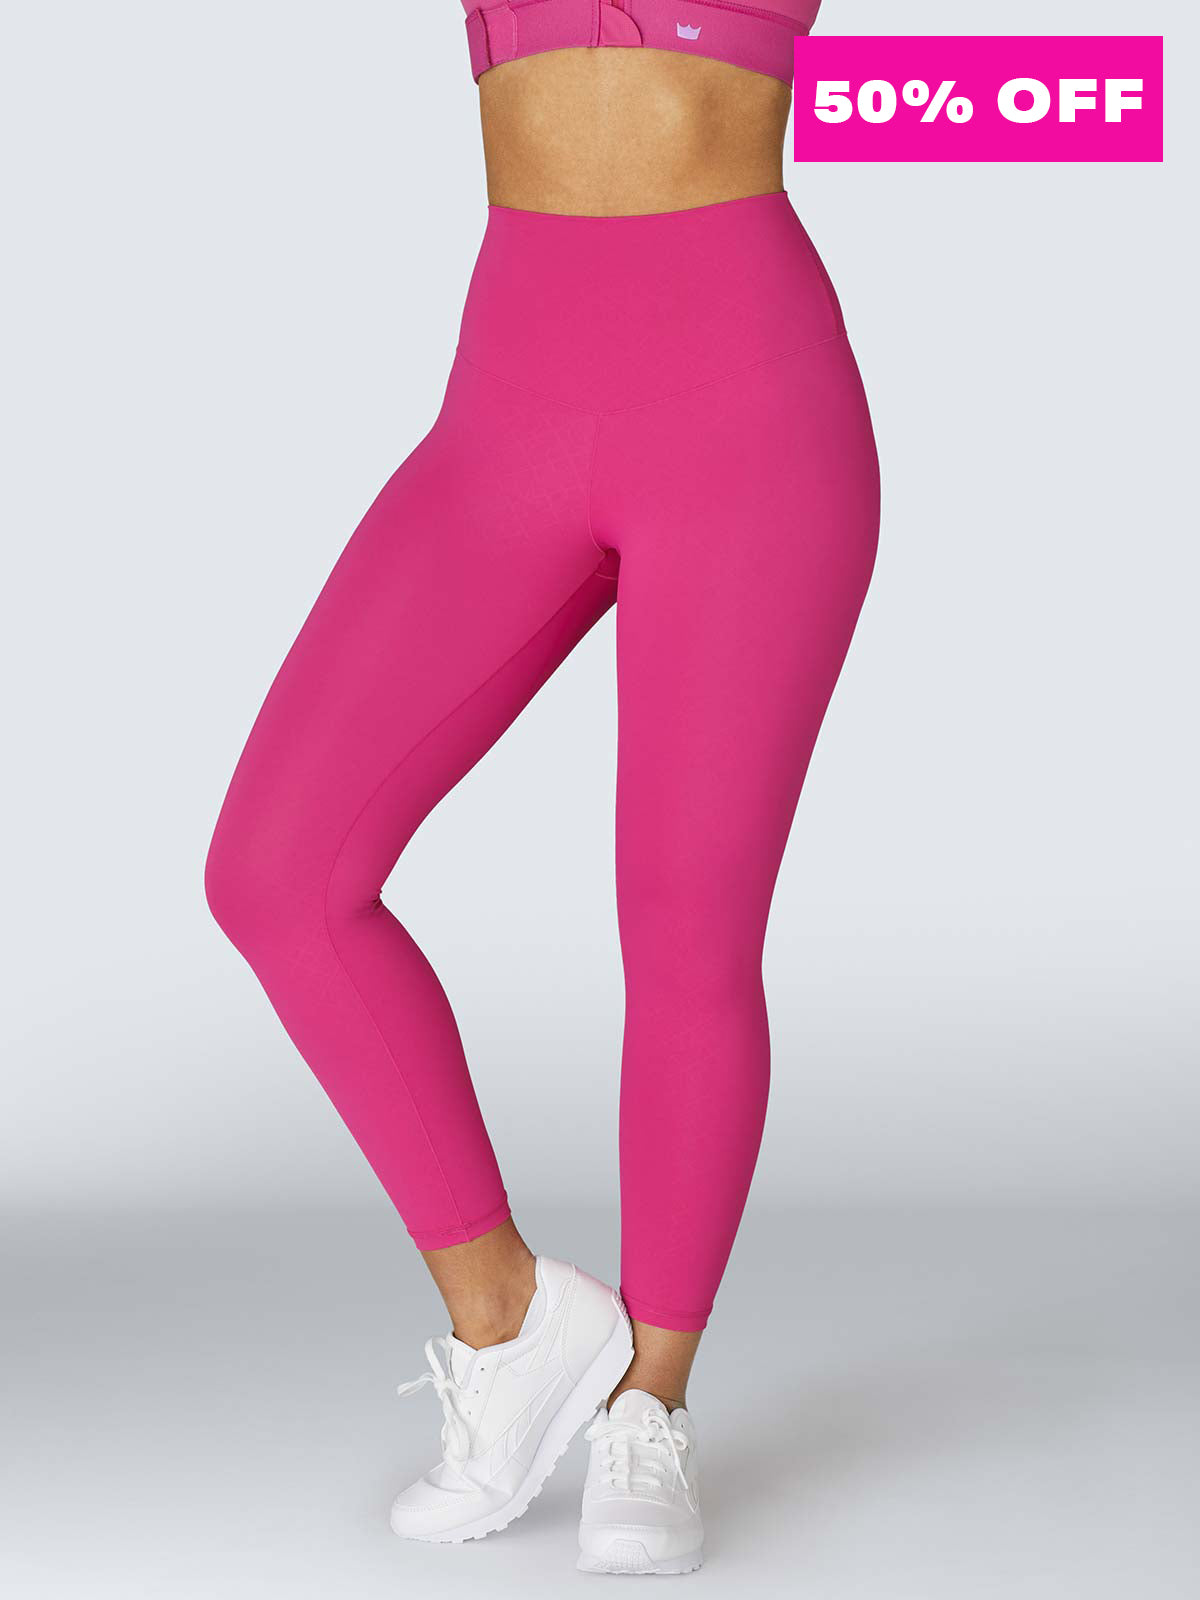  Stretch Is Comfort Girls Cotton Leggings Hot Pink Small